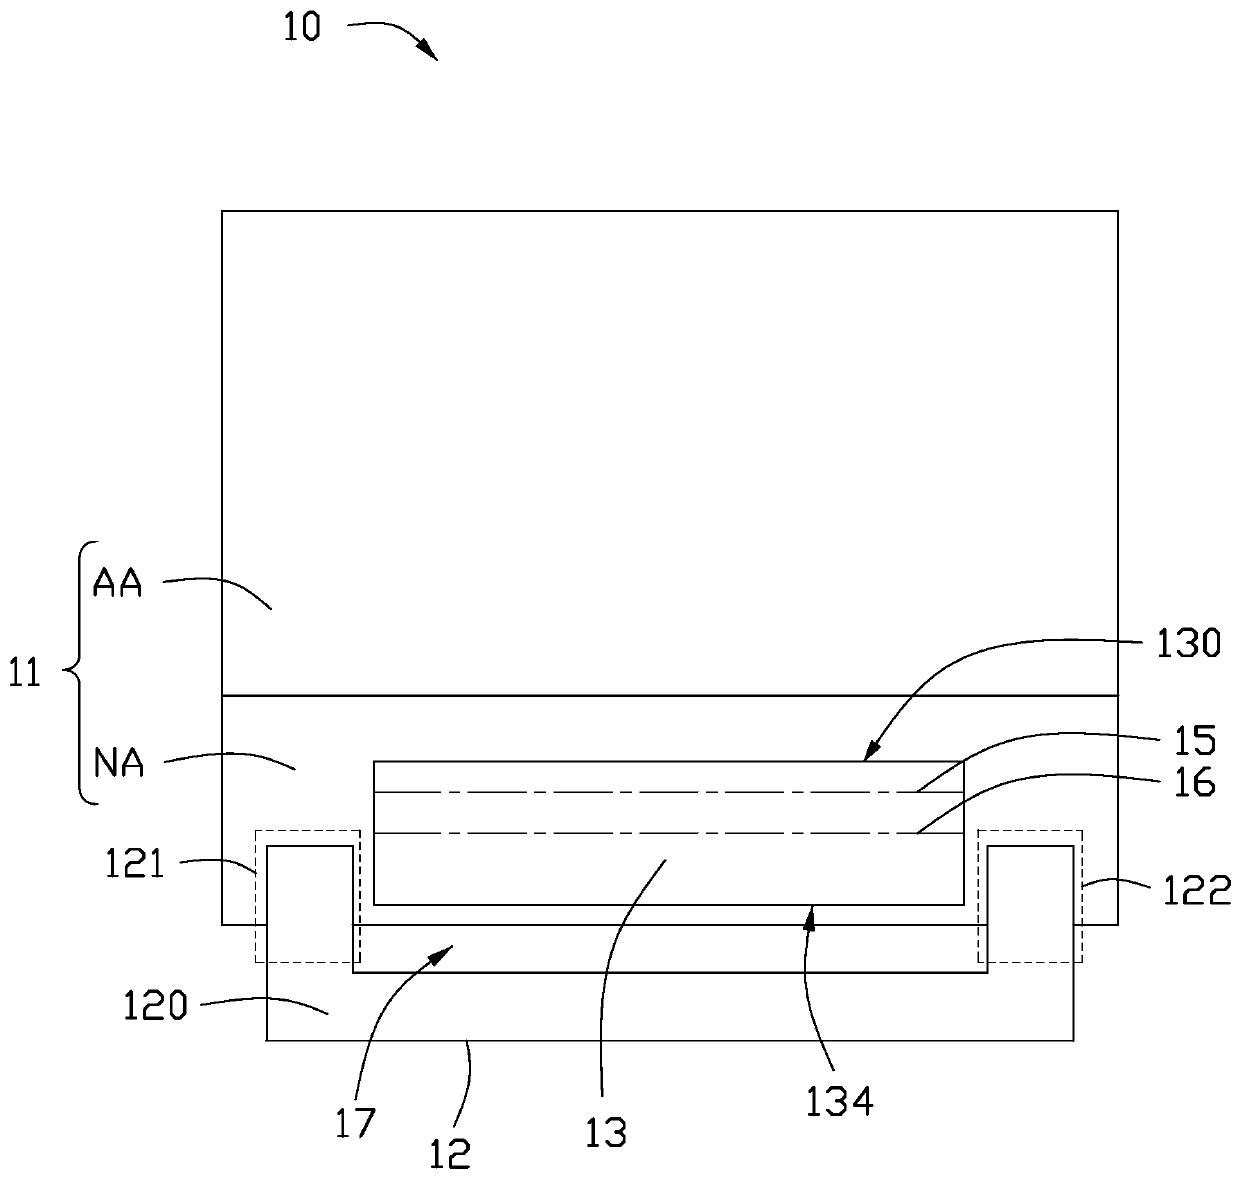 Display panel, driver and flexible circuit board